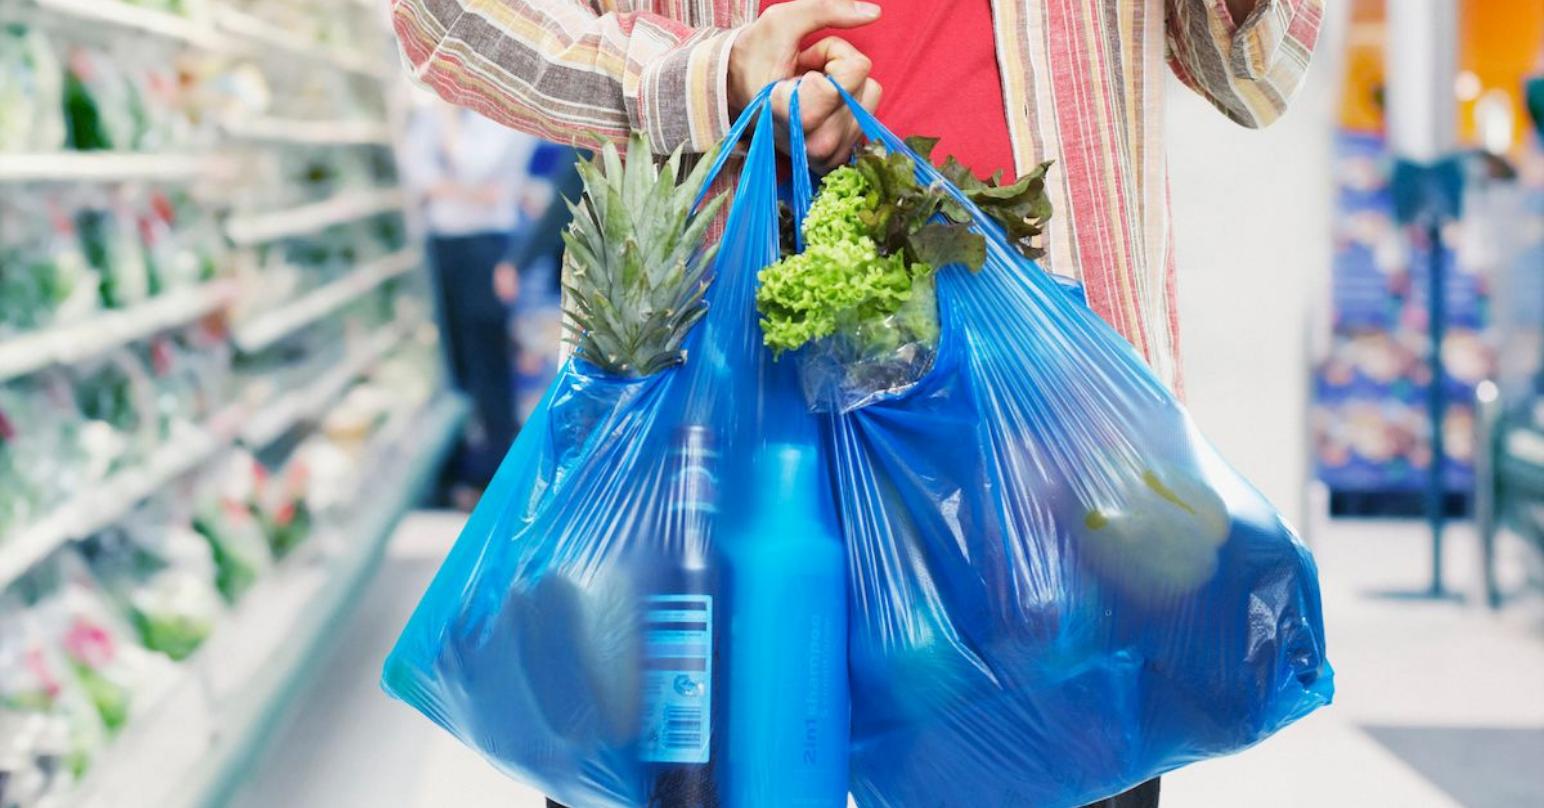 traditional retail - plastic grocery bags - Traditional Retail Council - Retail Market Research Reports